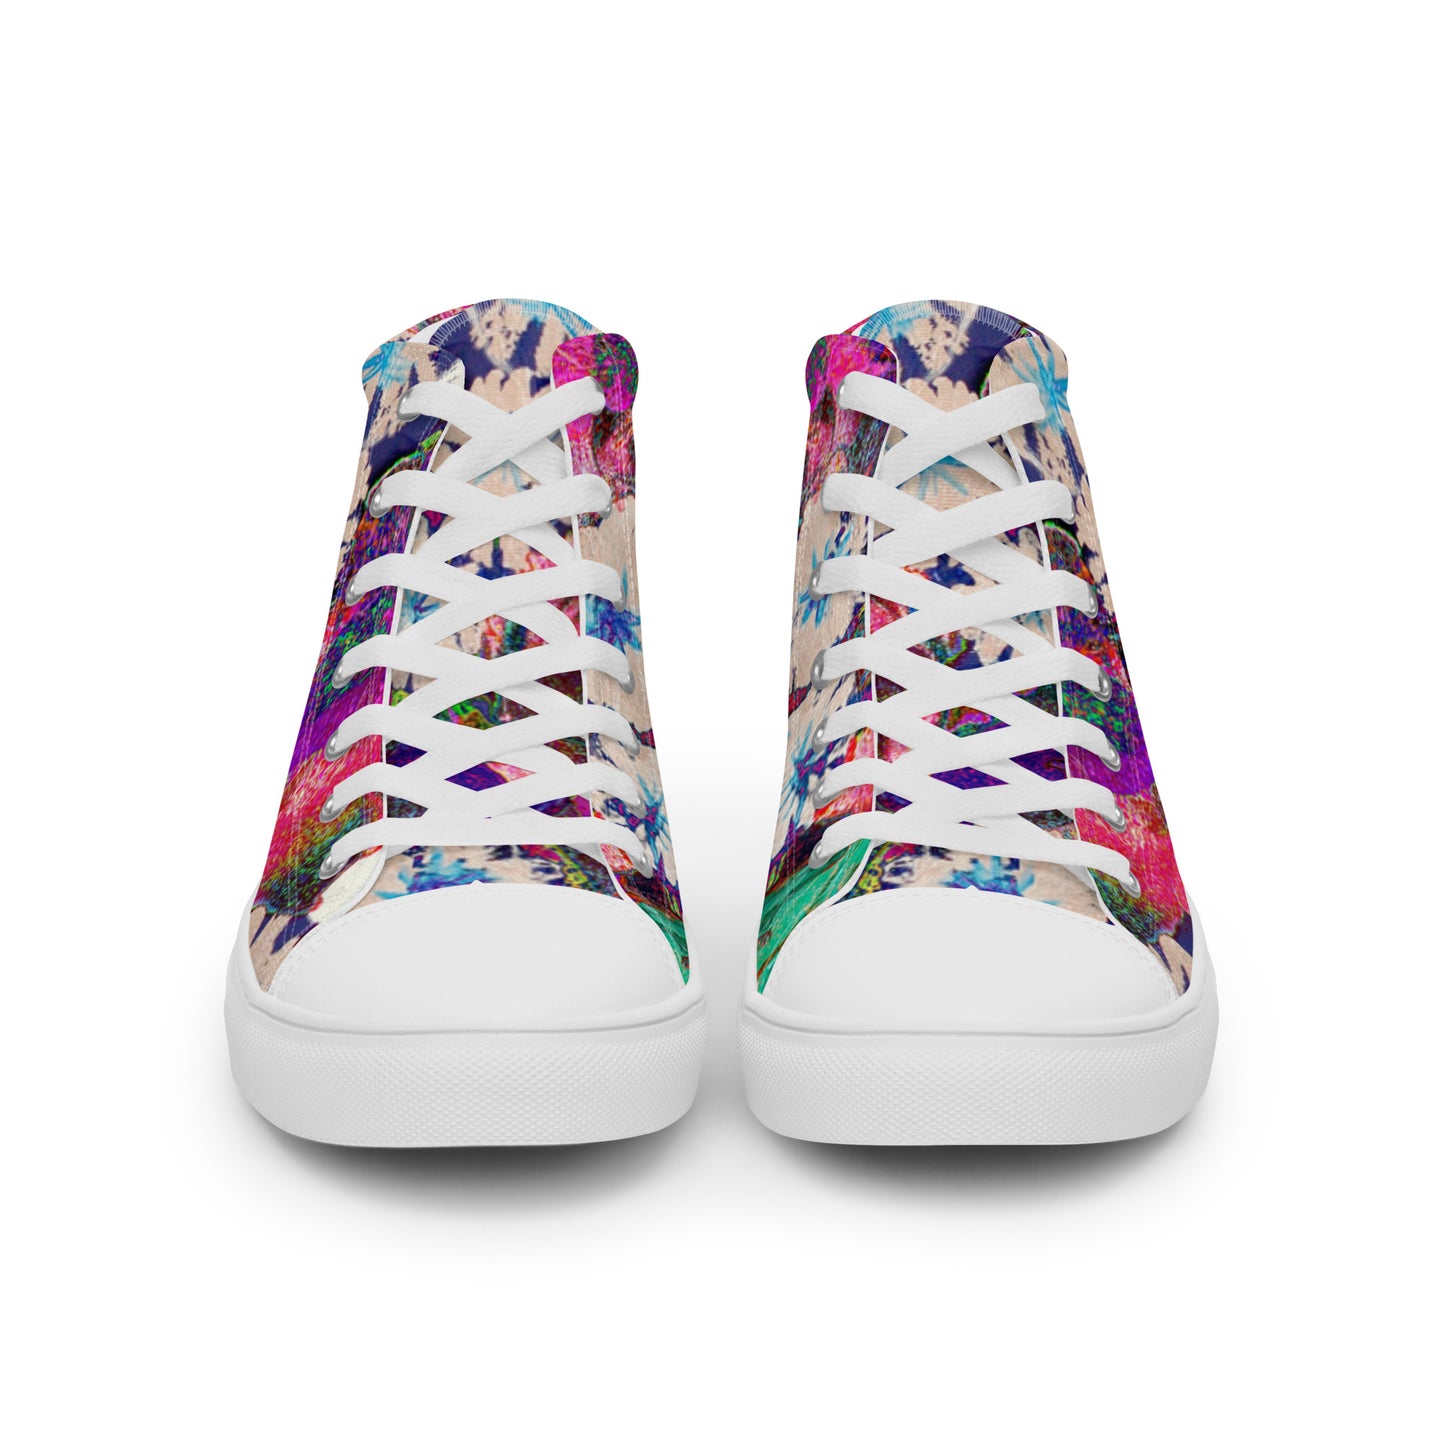 Women’s high top canvas shoes pink flowers